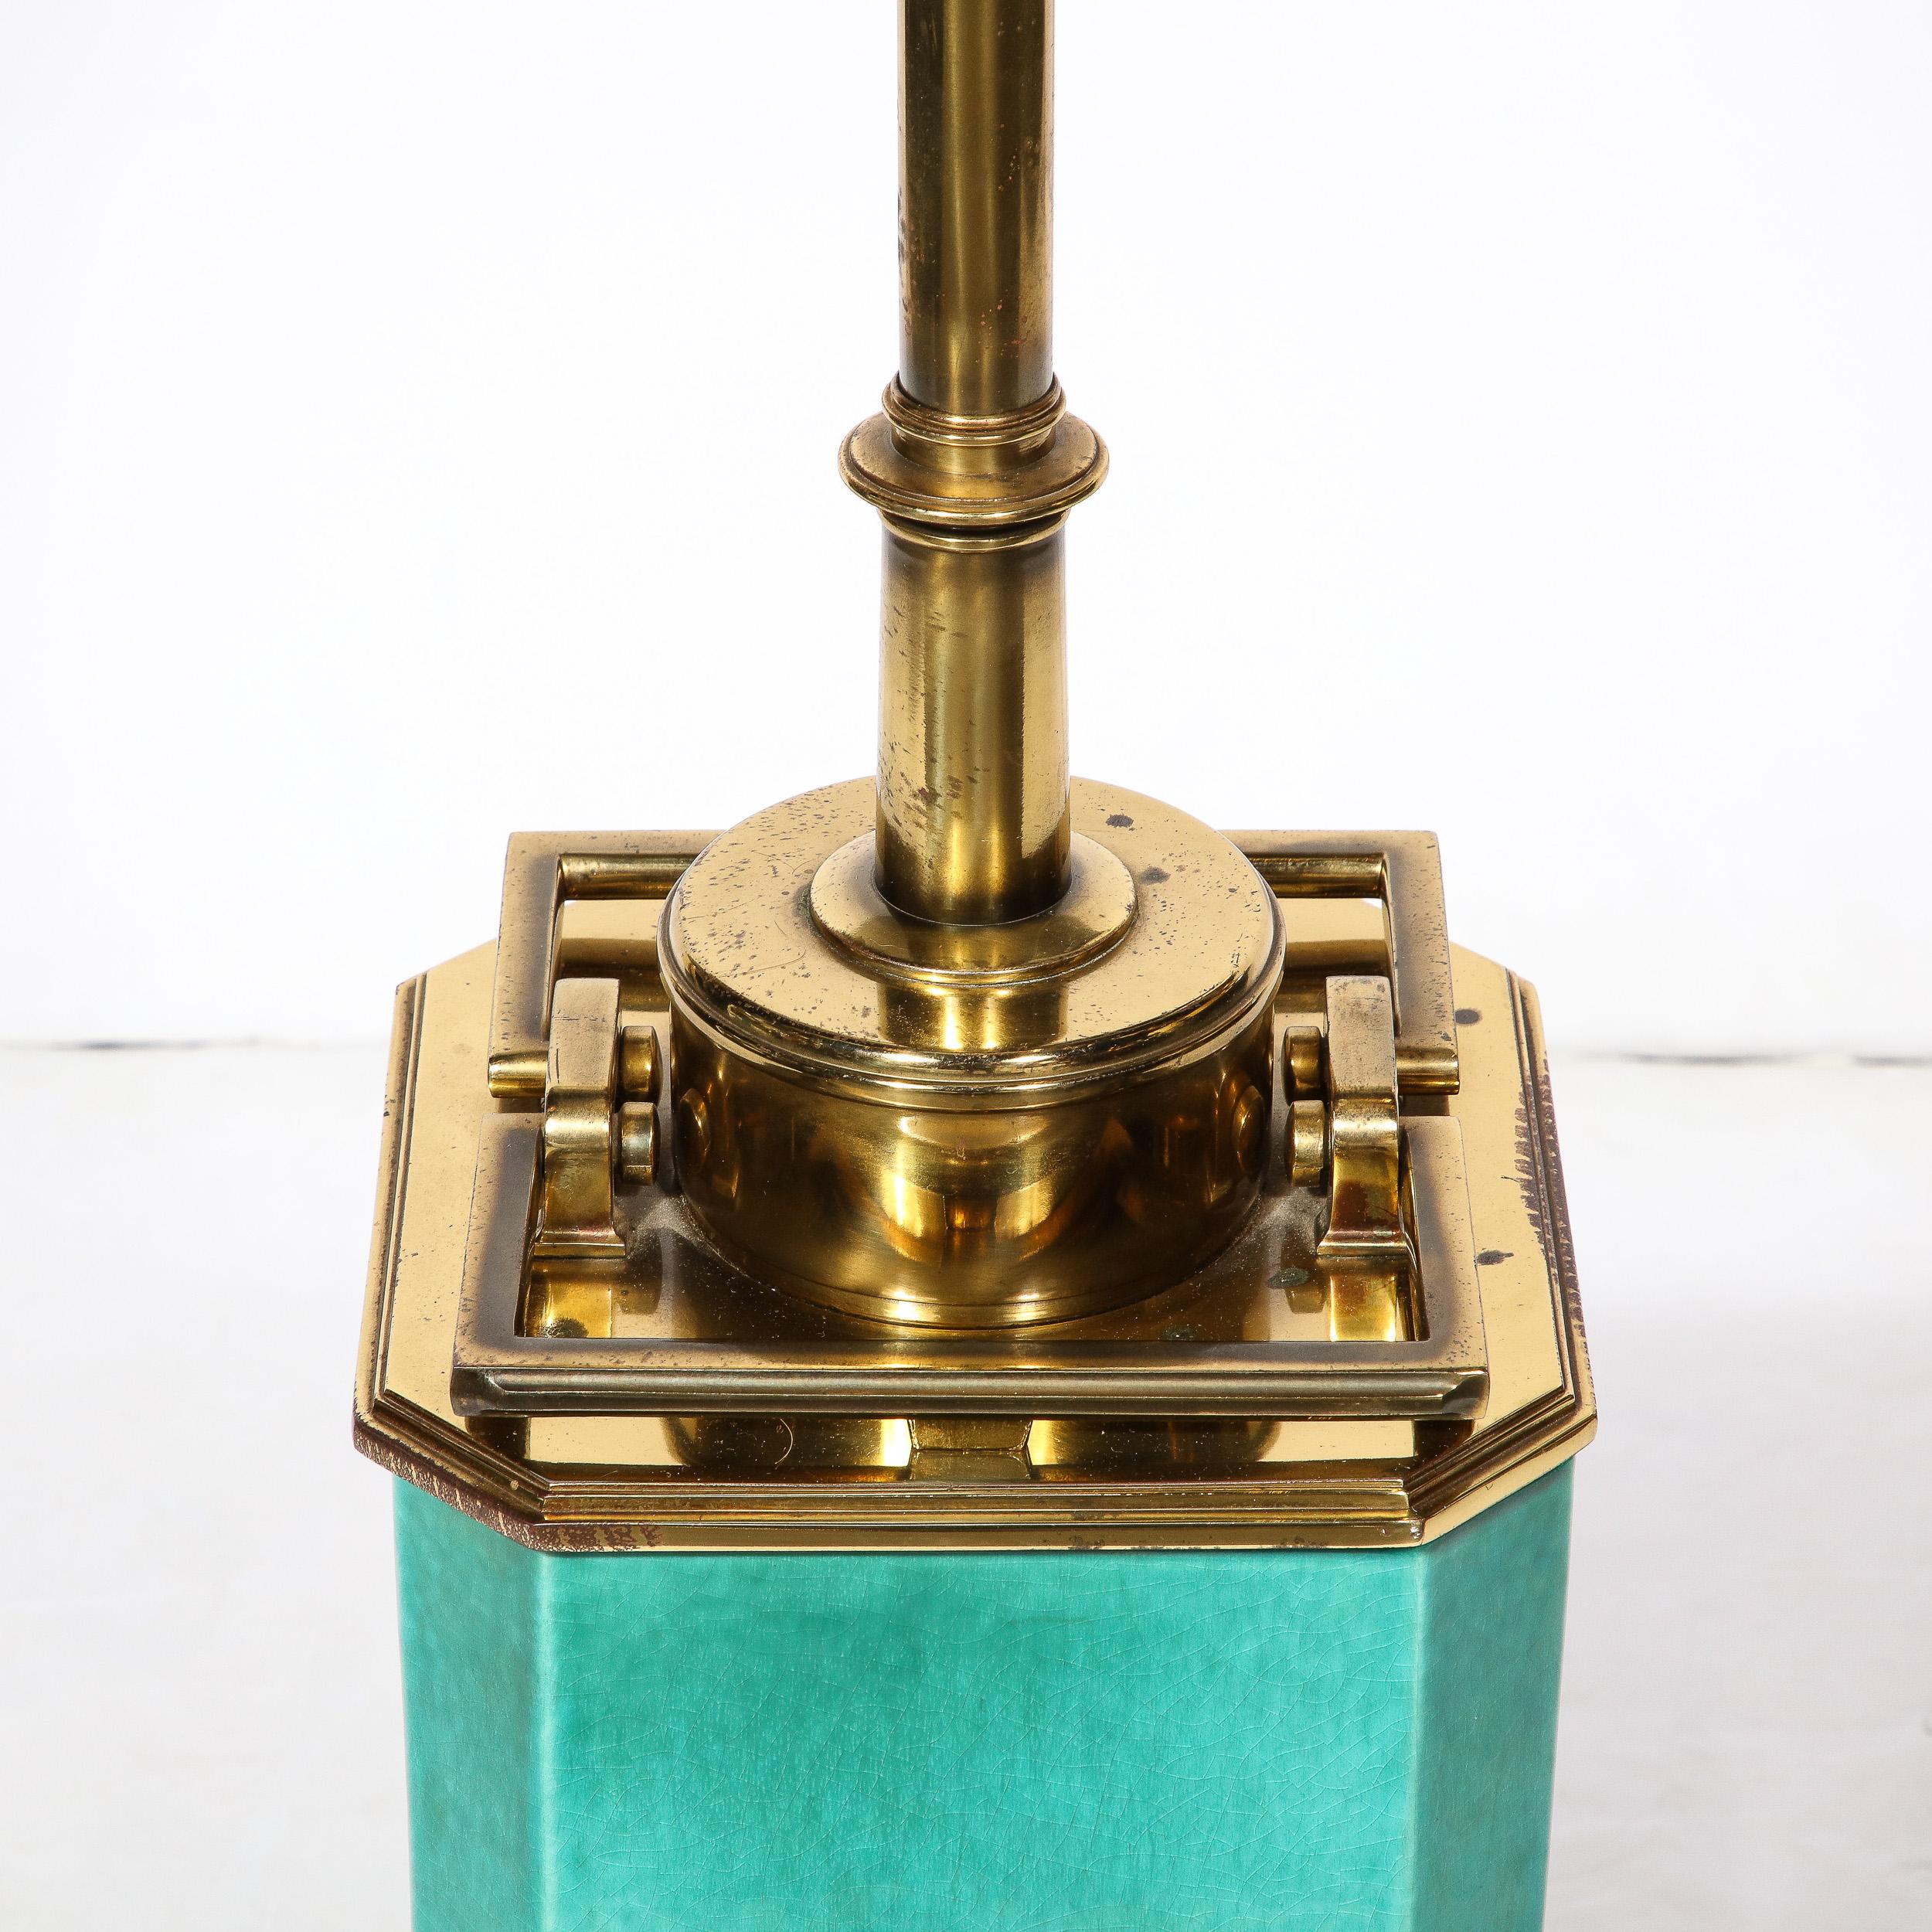 Ceramic Mid-Century Modernist Table Lamp in Turquoise Jade w/ Polished Brass Fittings For Sale